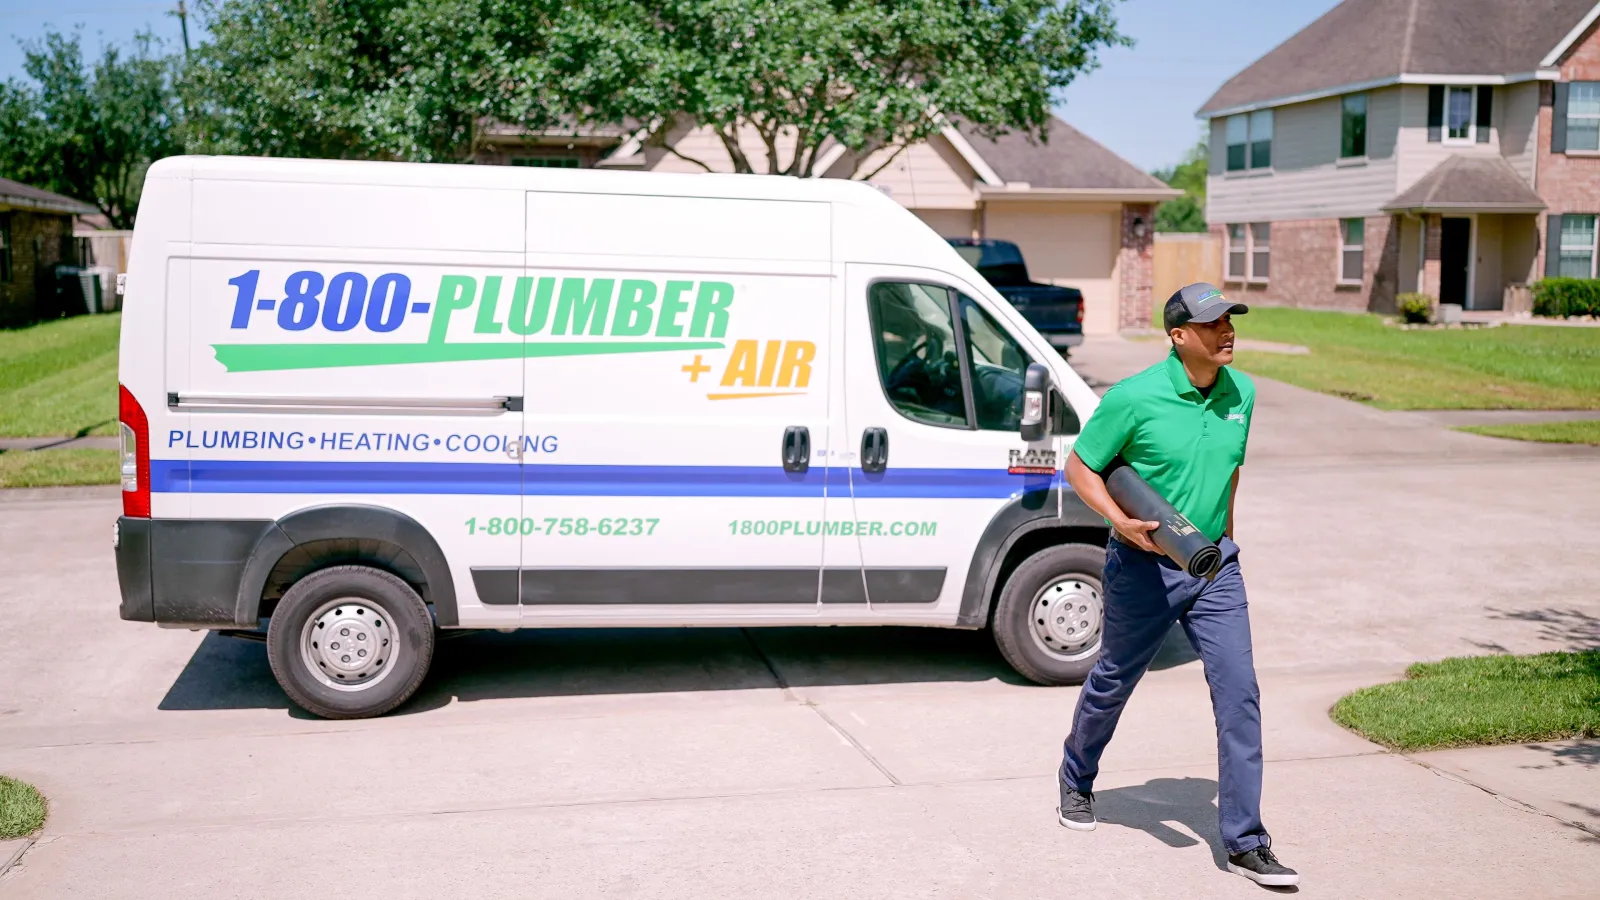 A Scottsdale plumber with a 1-800-Plumber +Air truck